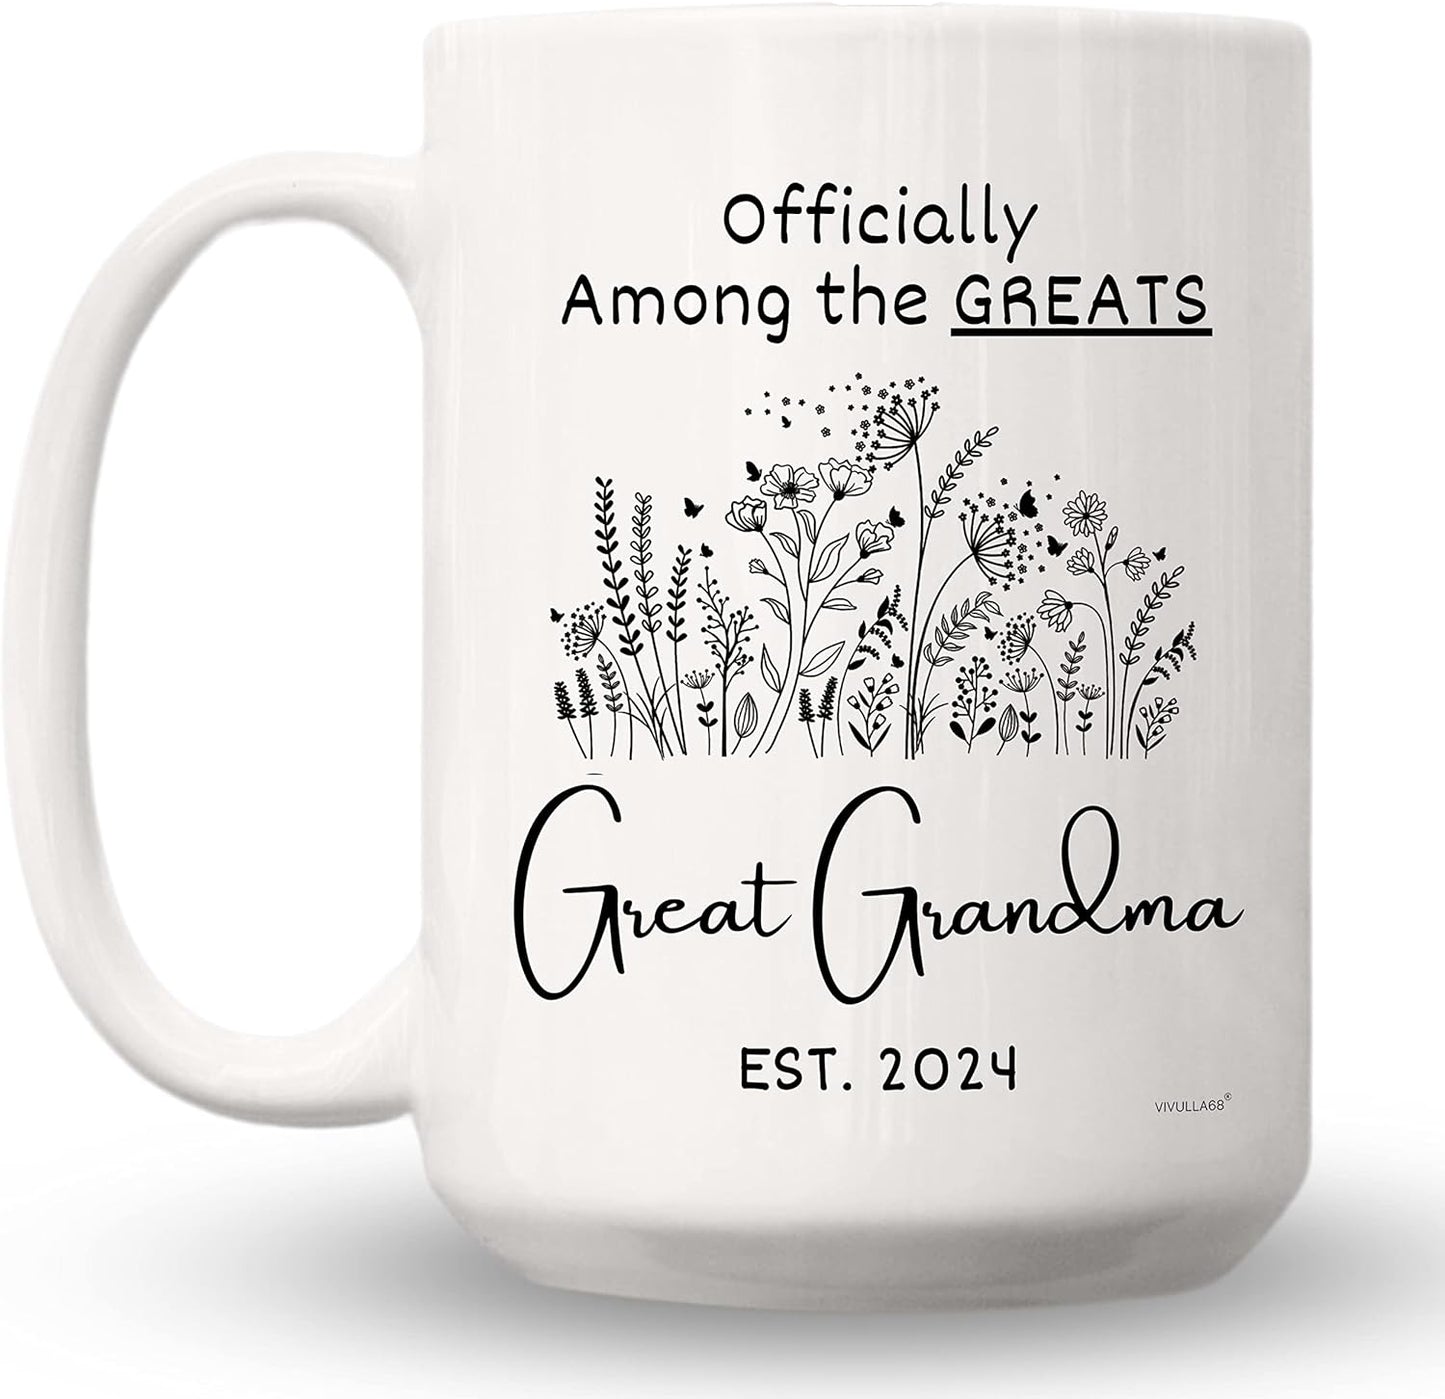 Vivulla68 Great Grandma Mug 2024, New Great Grandma Gifts, Youre Going To Be Great Grandparents Gifts, Presents For Great Grandma Pregnancy Announcement, Happy Mothers Day Gifts for Great Grandmother